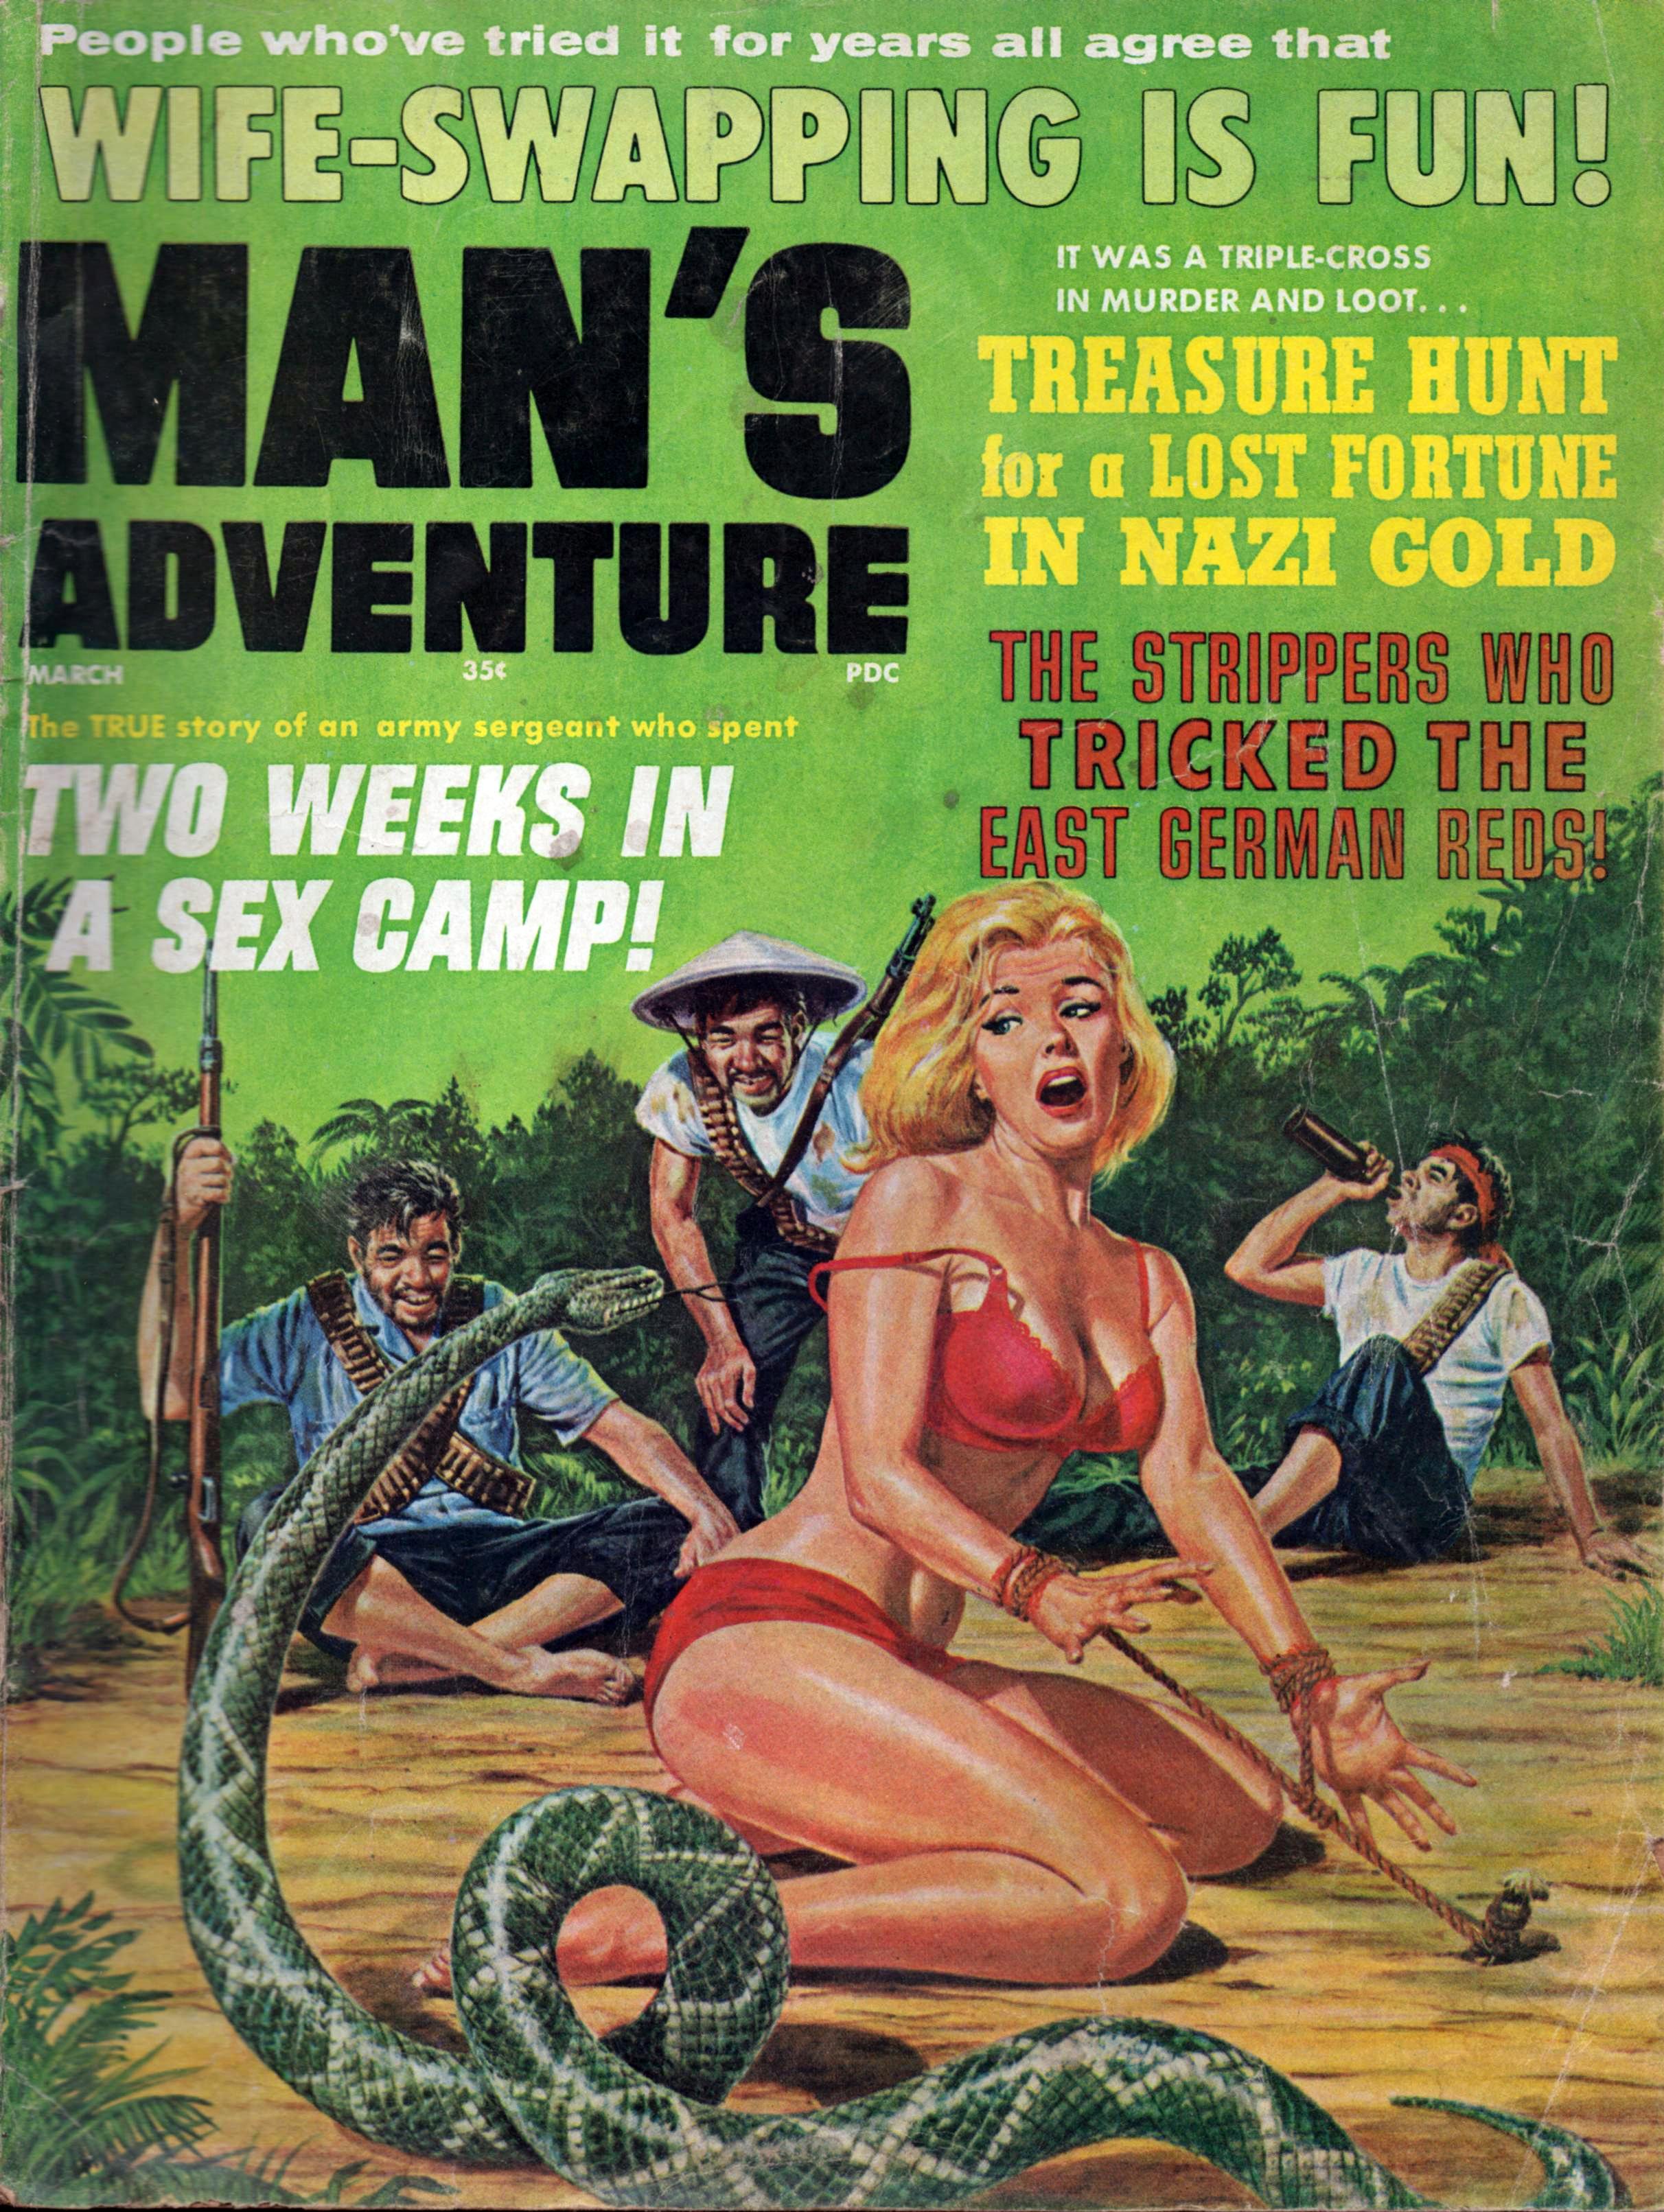 Treasure Hunt For A Lost Fortune In Nazi Gold -- Pulp Covers